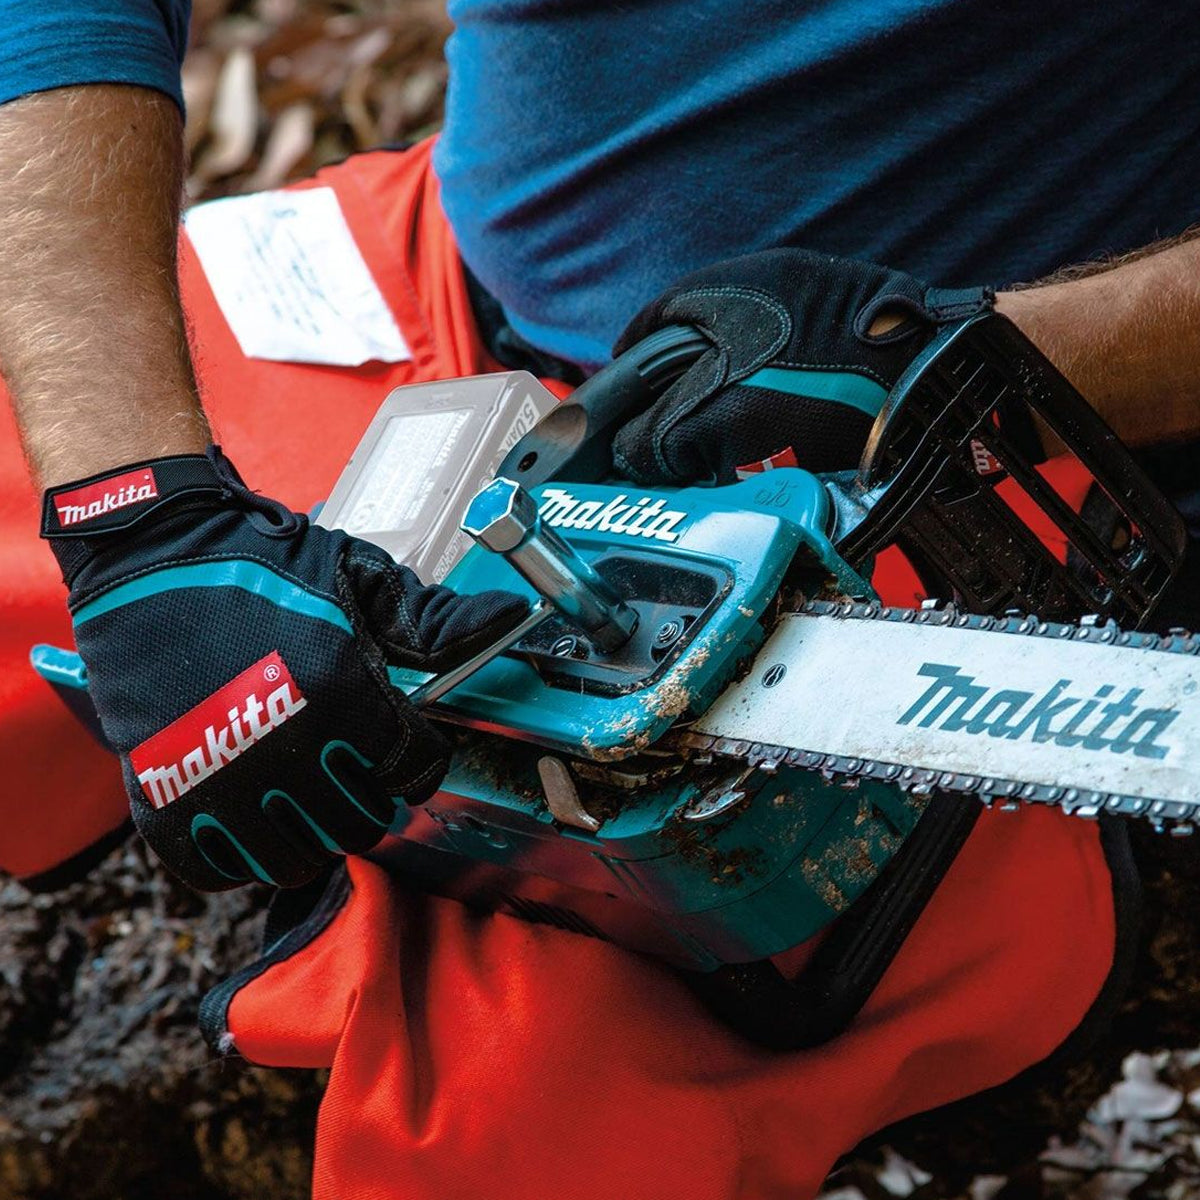 Makita DUC355PT2 36V 35cm Brushless Chainsaw With 2 x 5.0Ah Batteries & Twin Port Charger